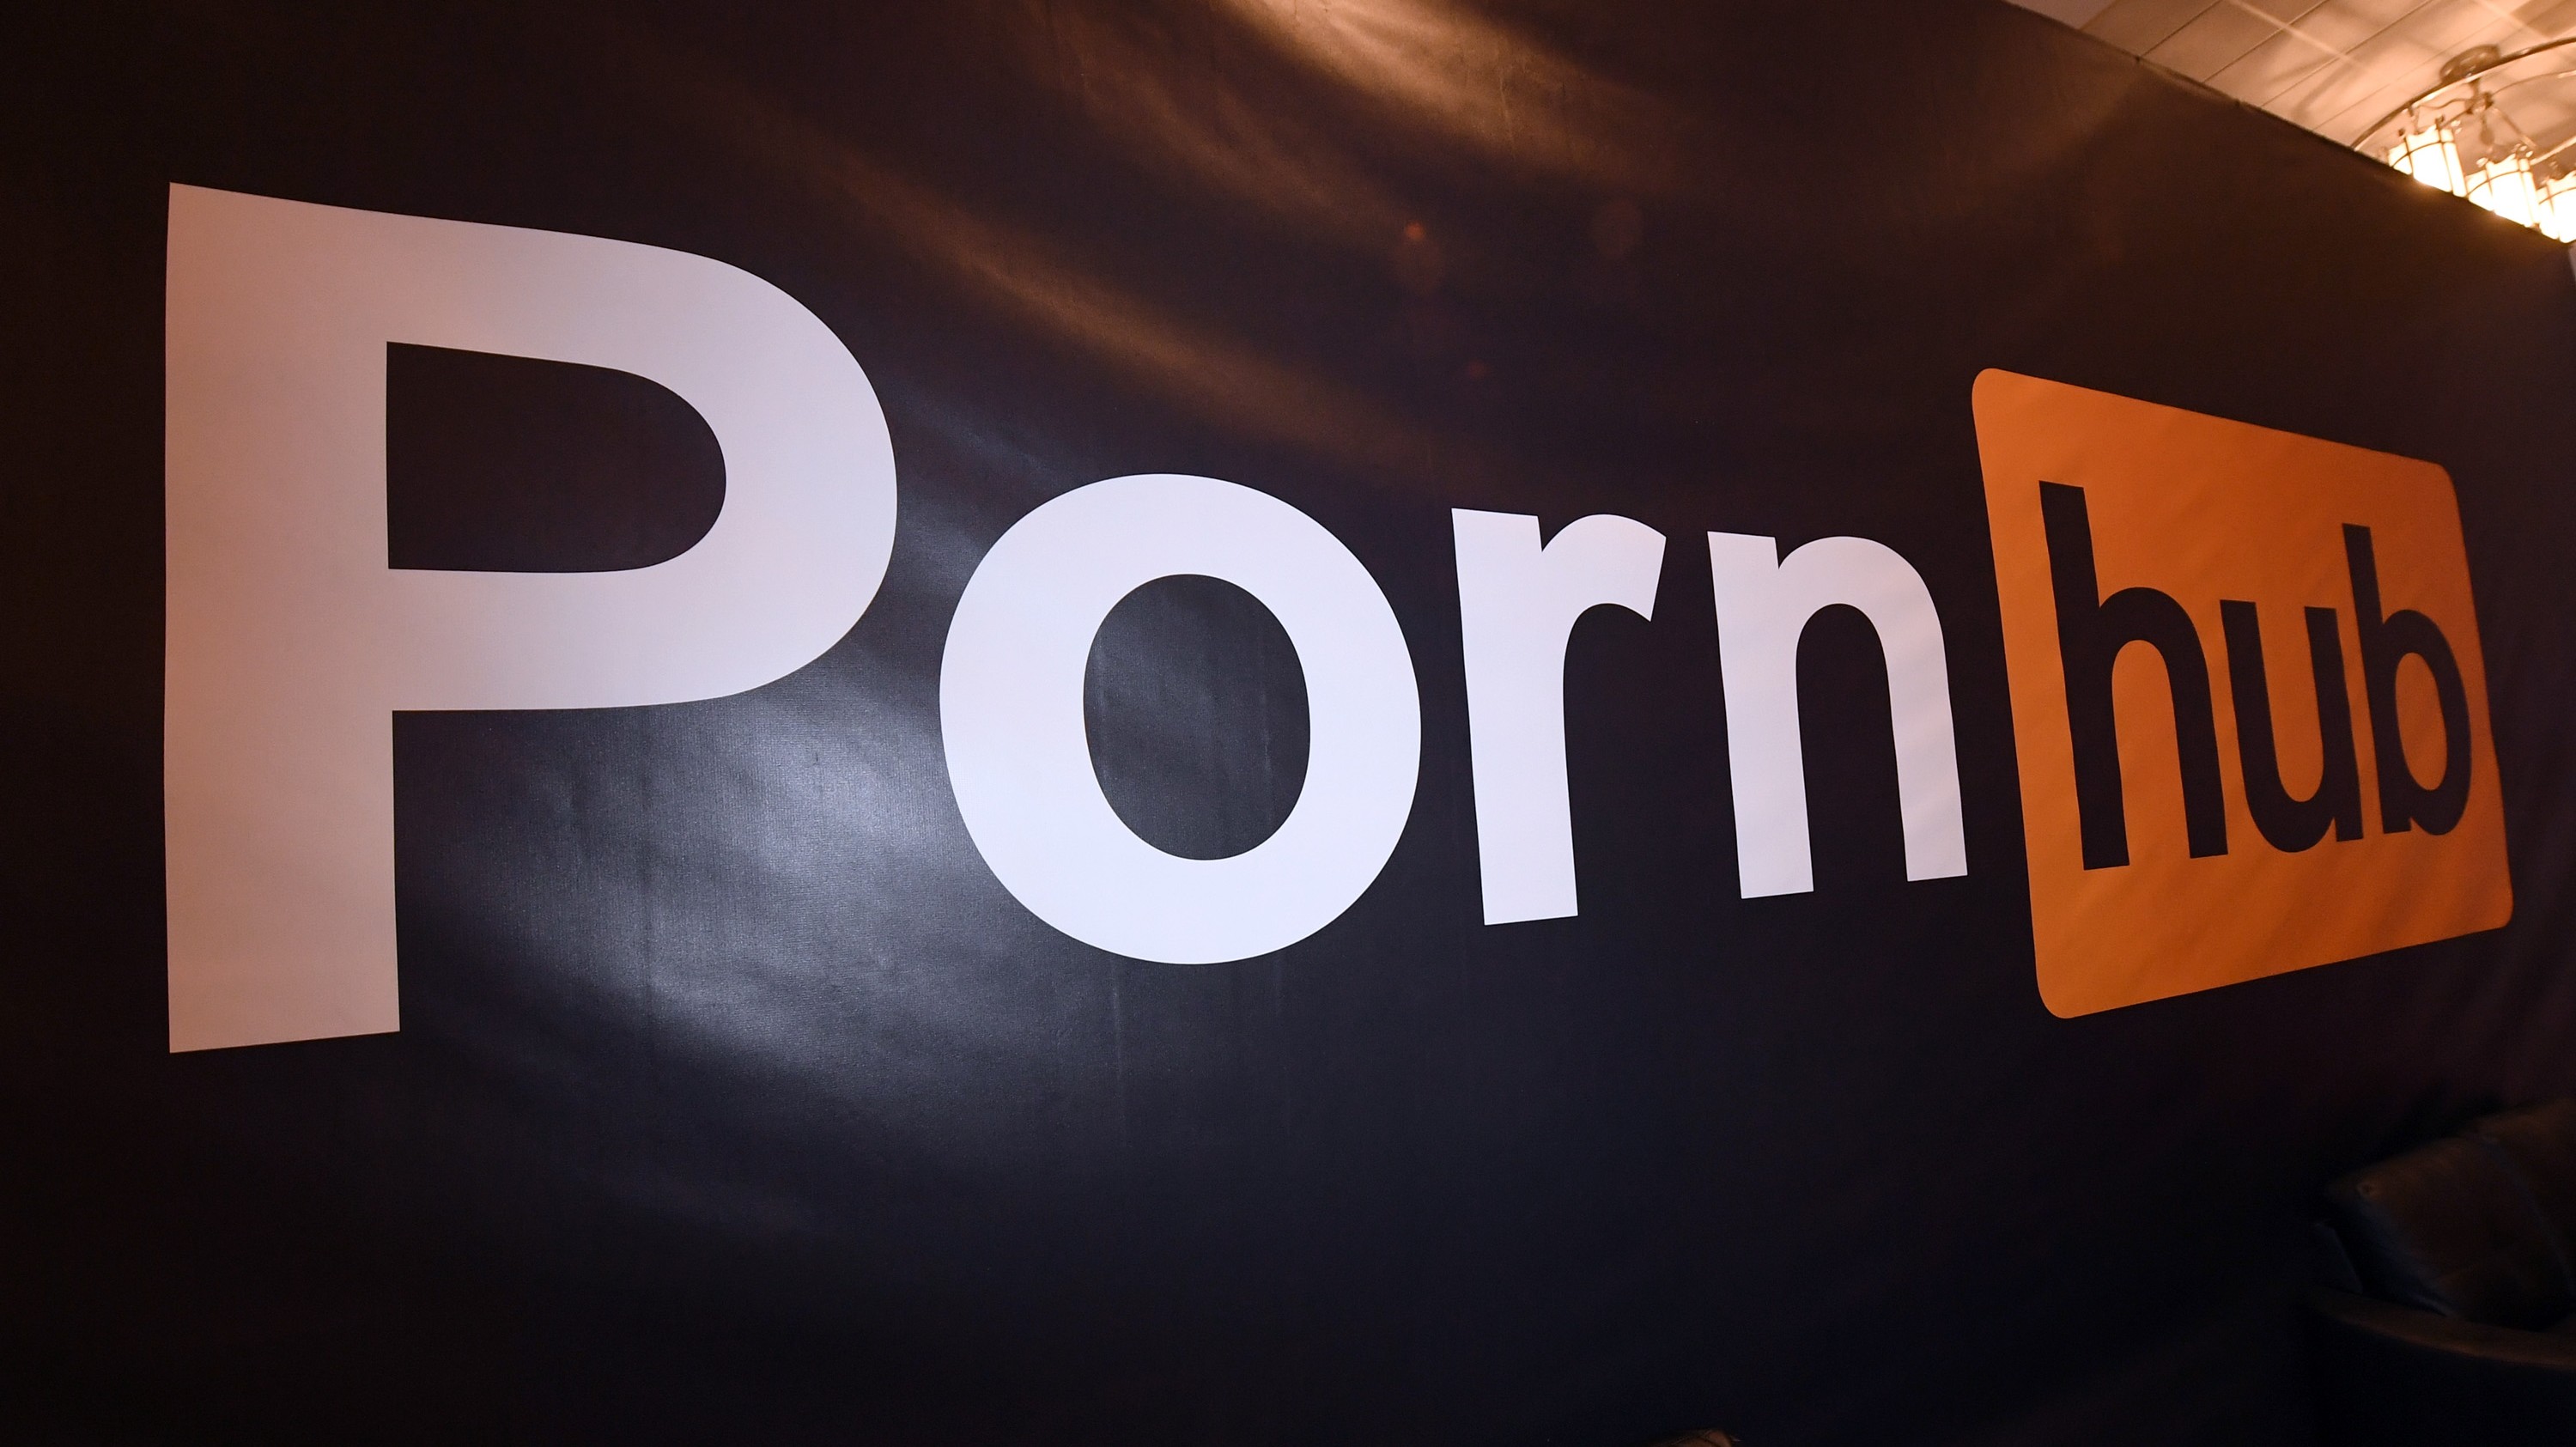 bill robidoux recommends How To Find Deleted Porn Videos